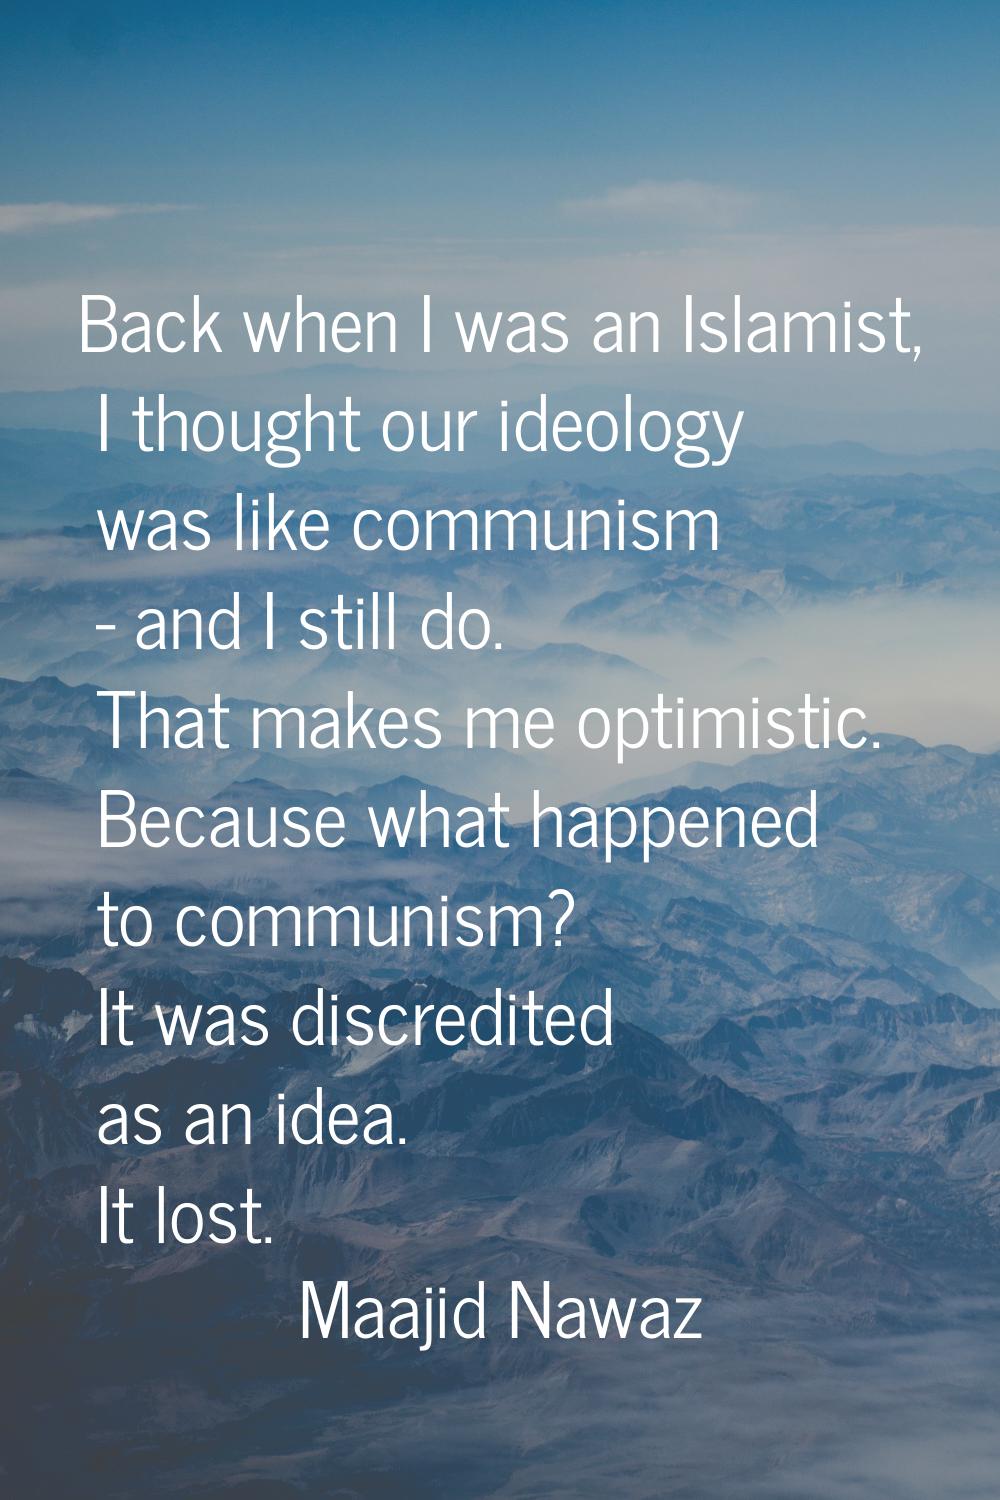 Back when I was an Islamist, I thought our ideology was like communism - and I still do. That makes